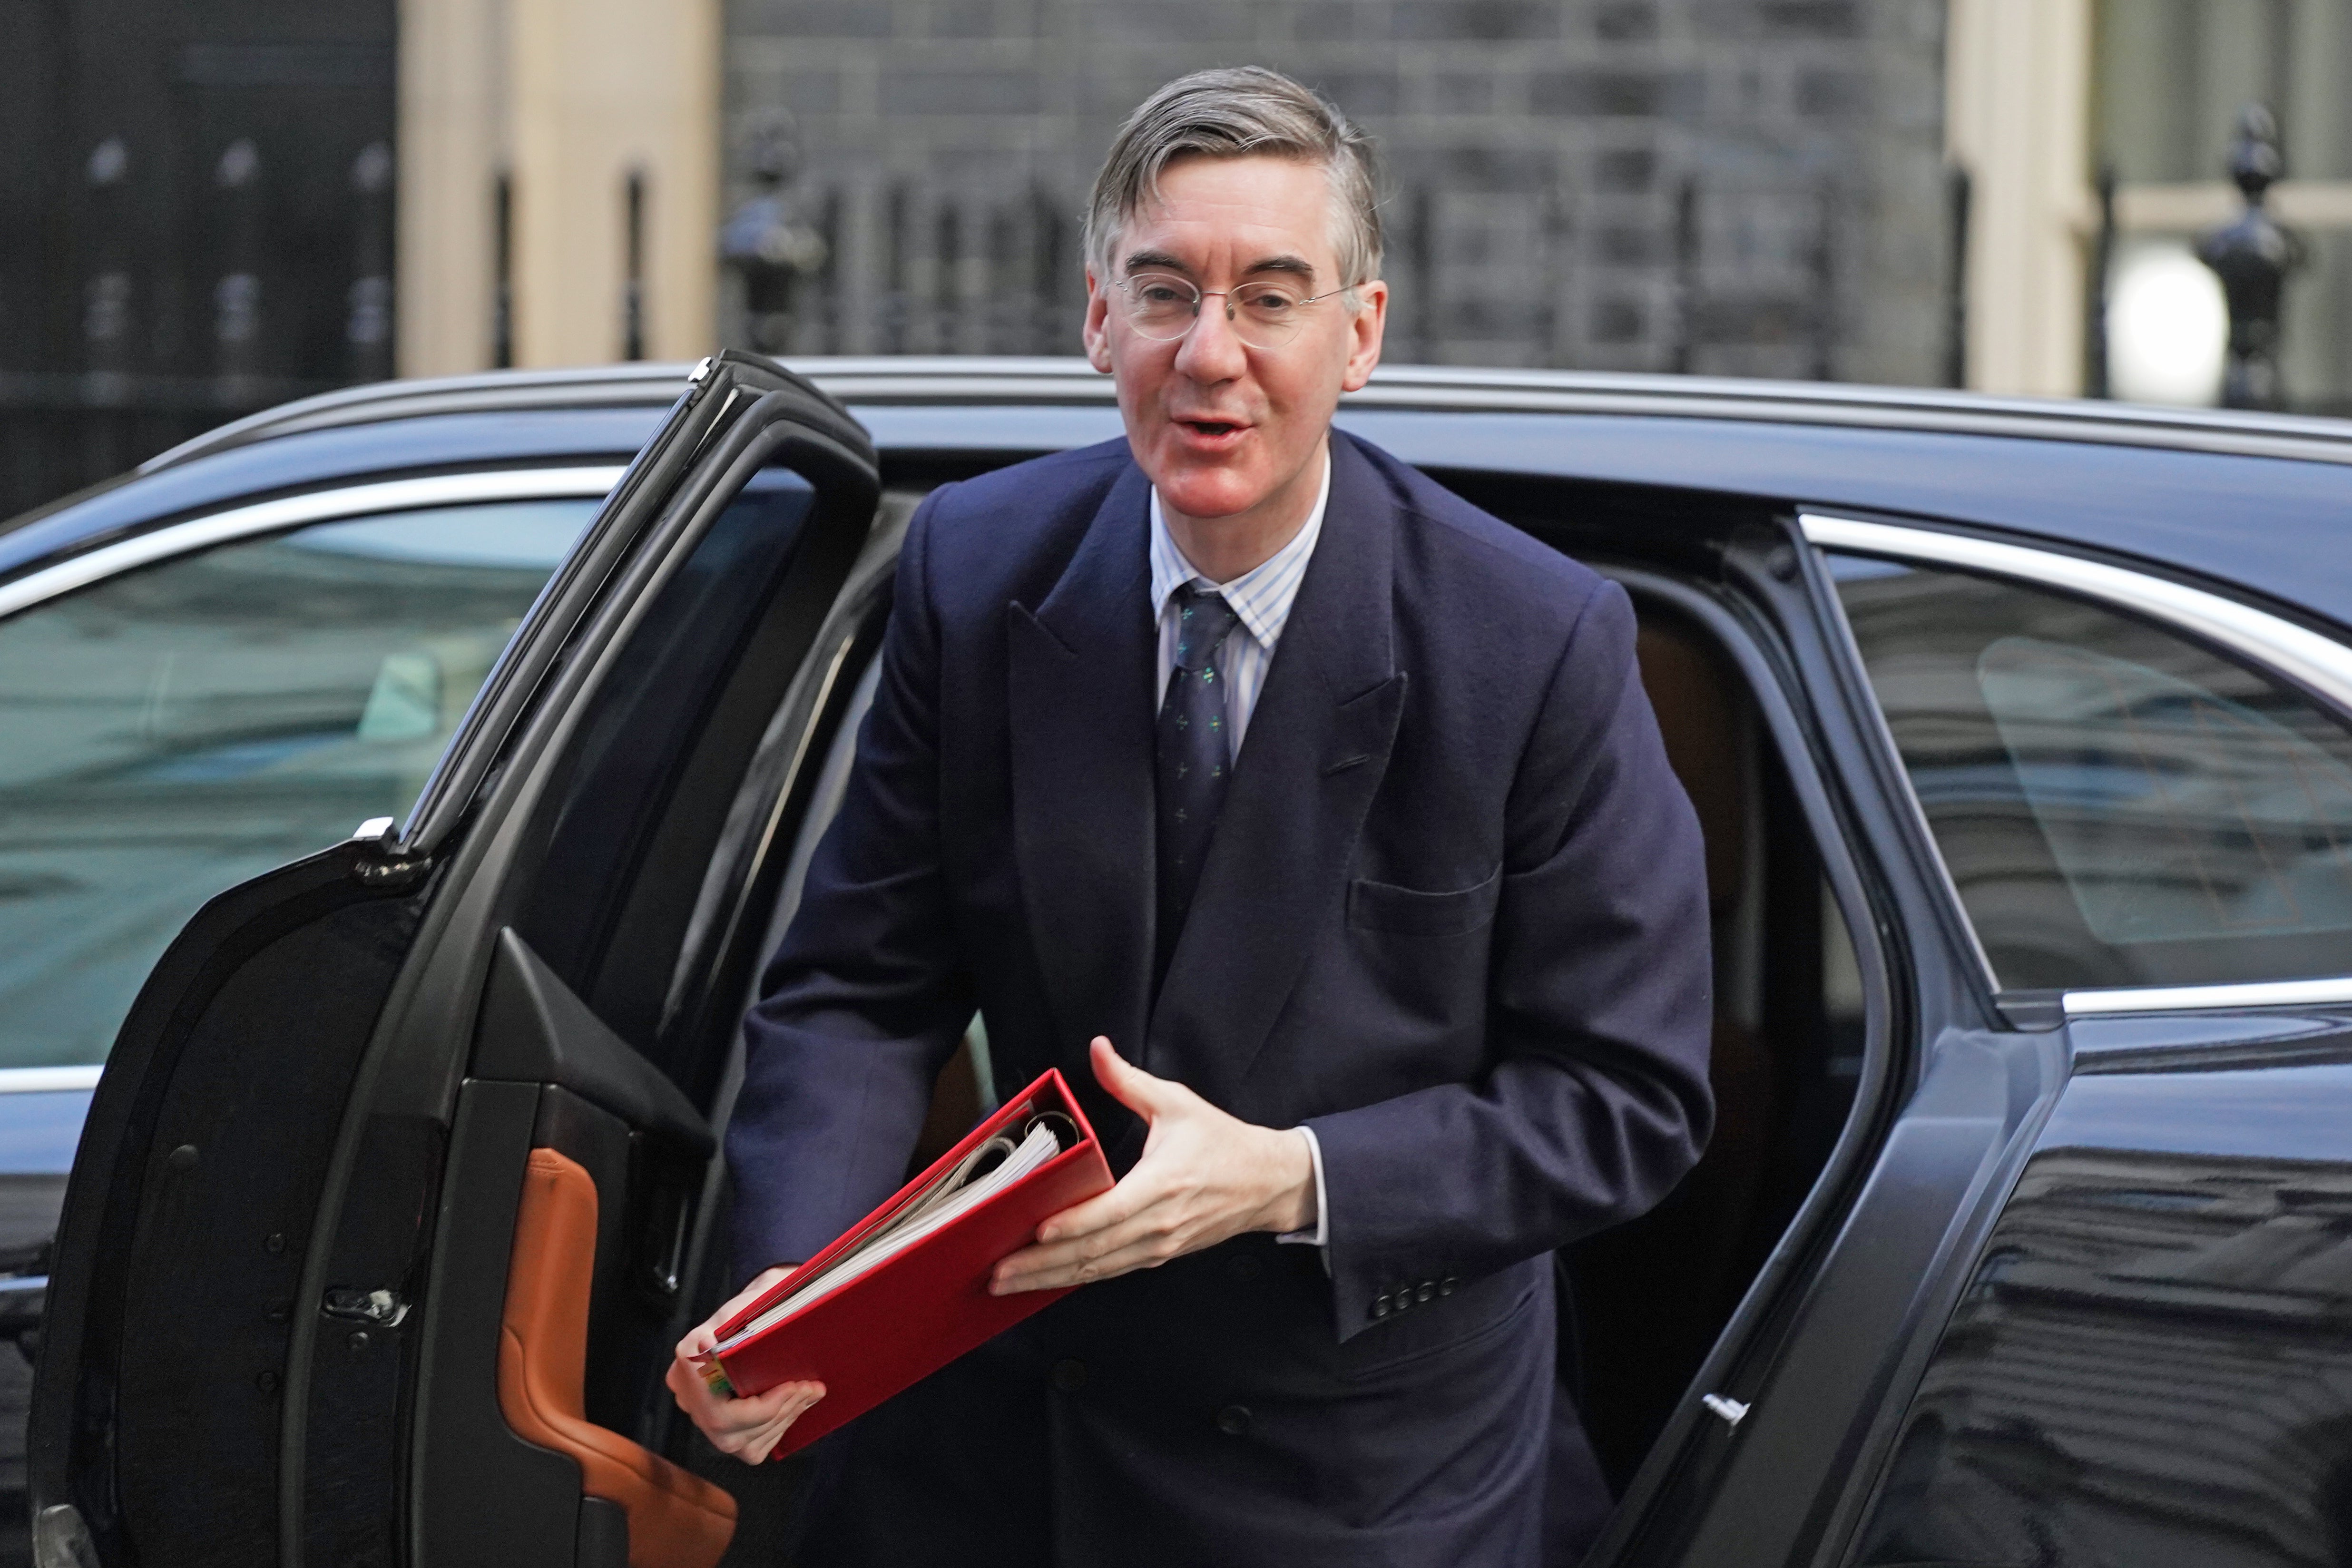 A Bill to remove EU ‘retained law’ – using regulations, behind MPs’ backs – is in Jacob Rees-Mogg’s in-tray